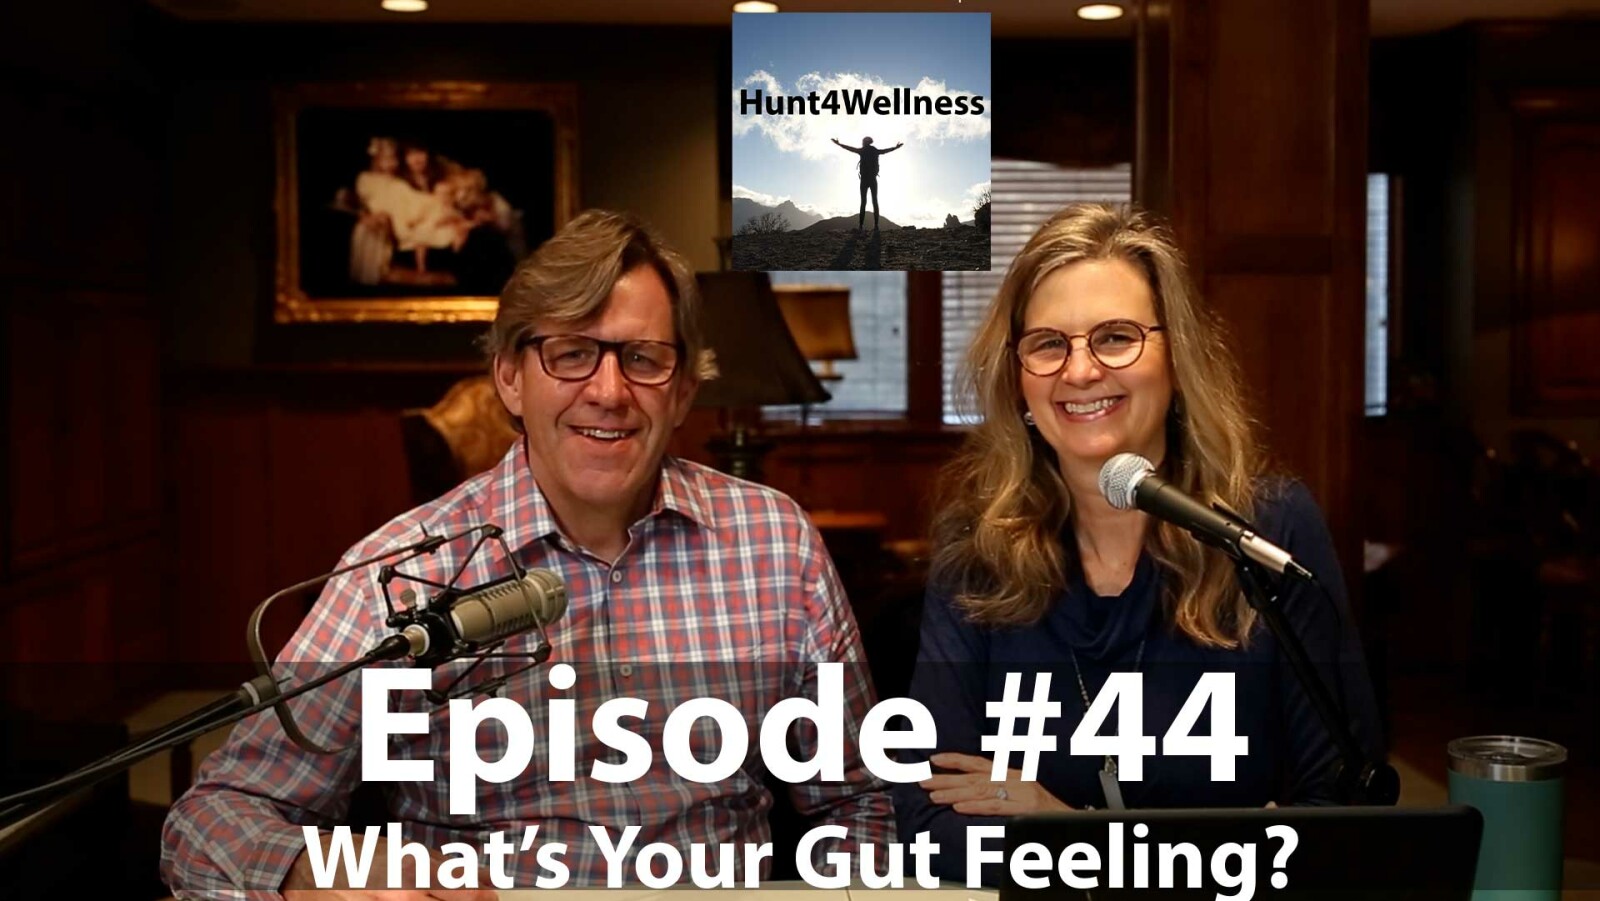 Episode #44 - What's Your Gut Feeling?